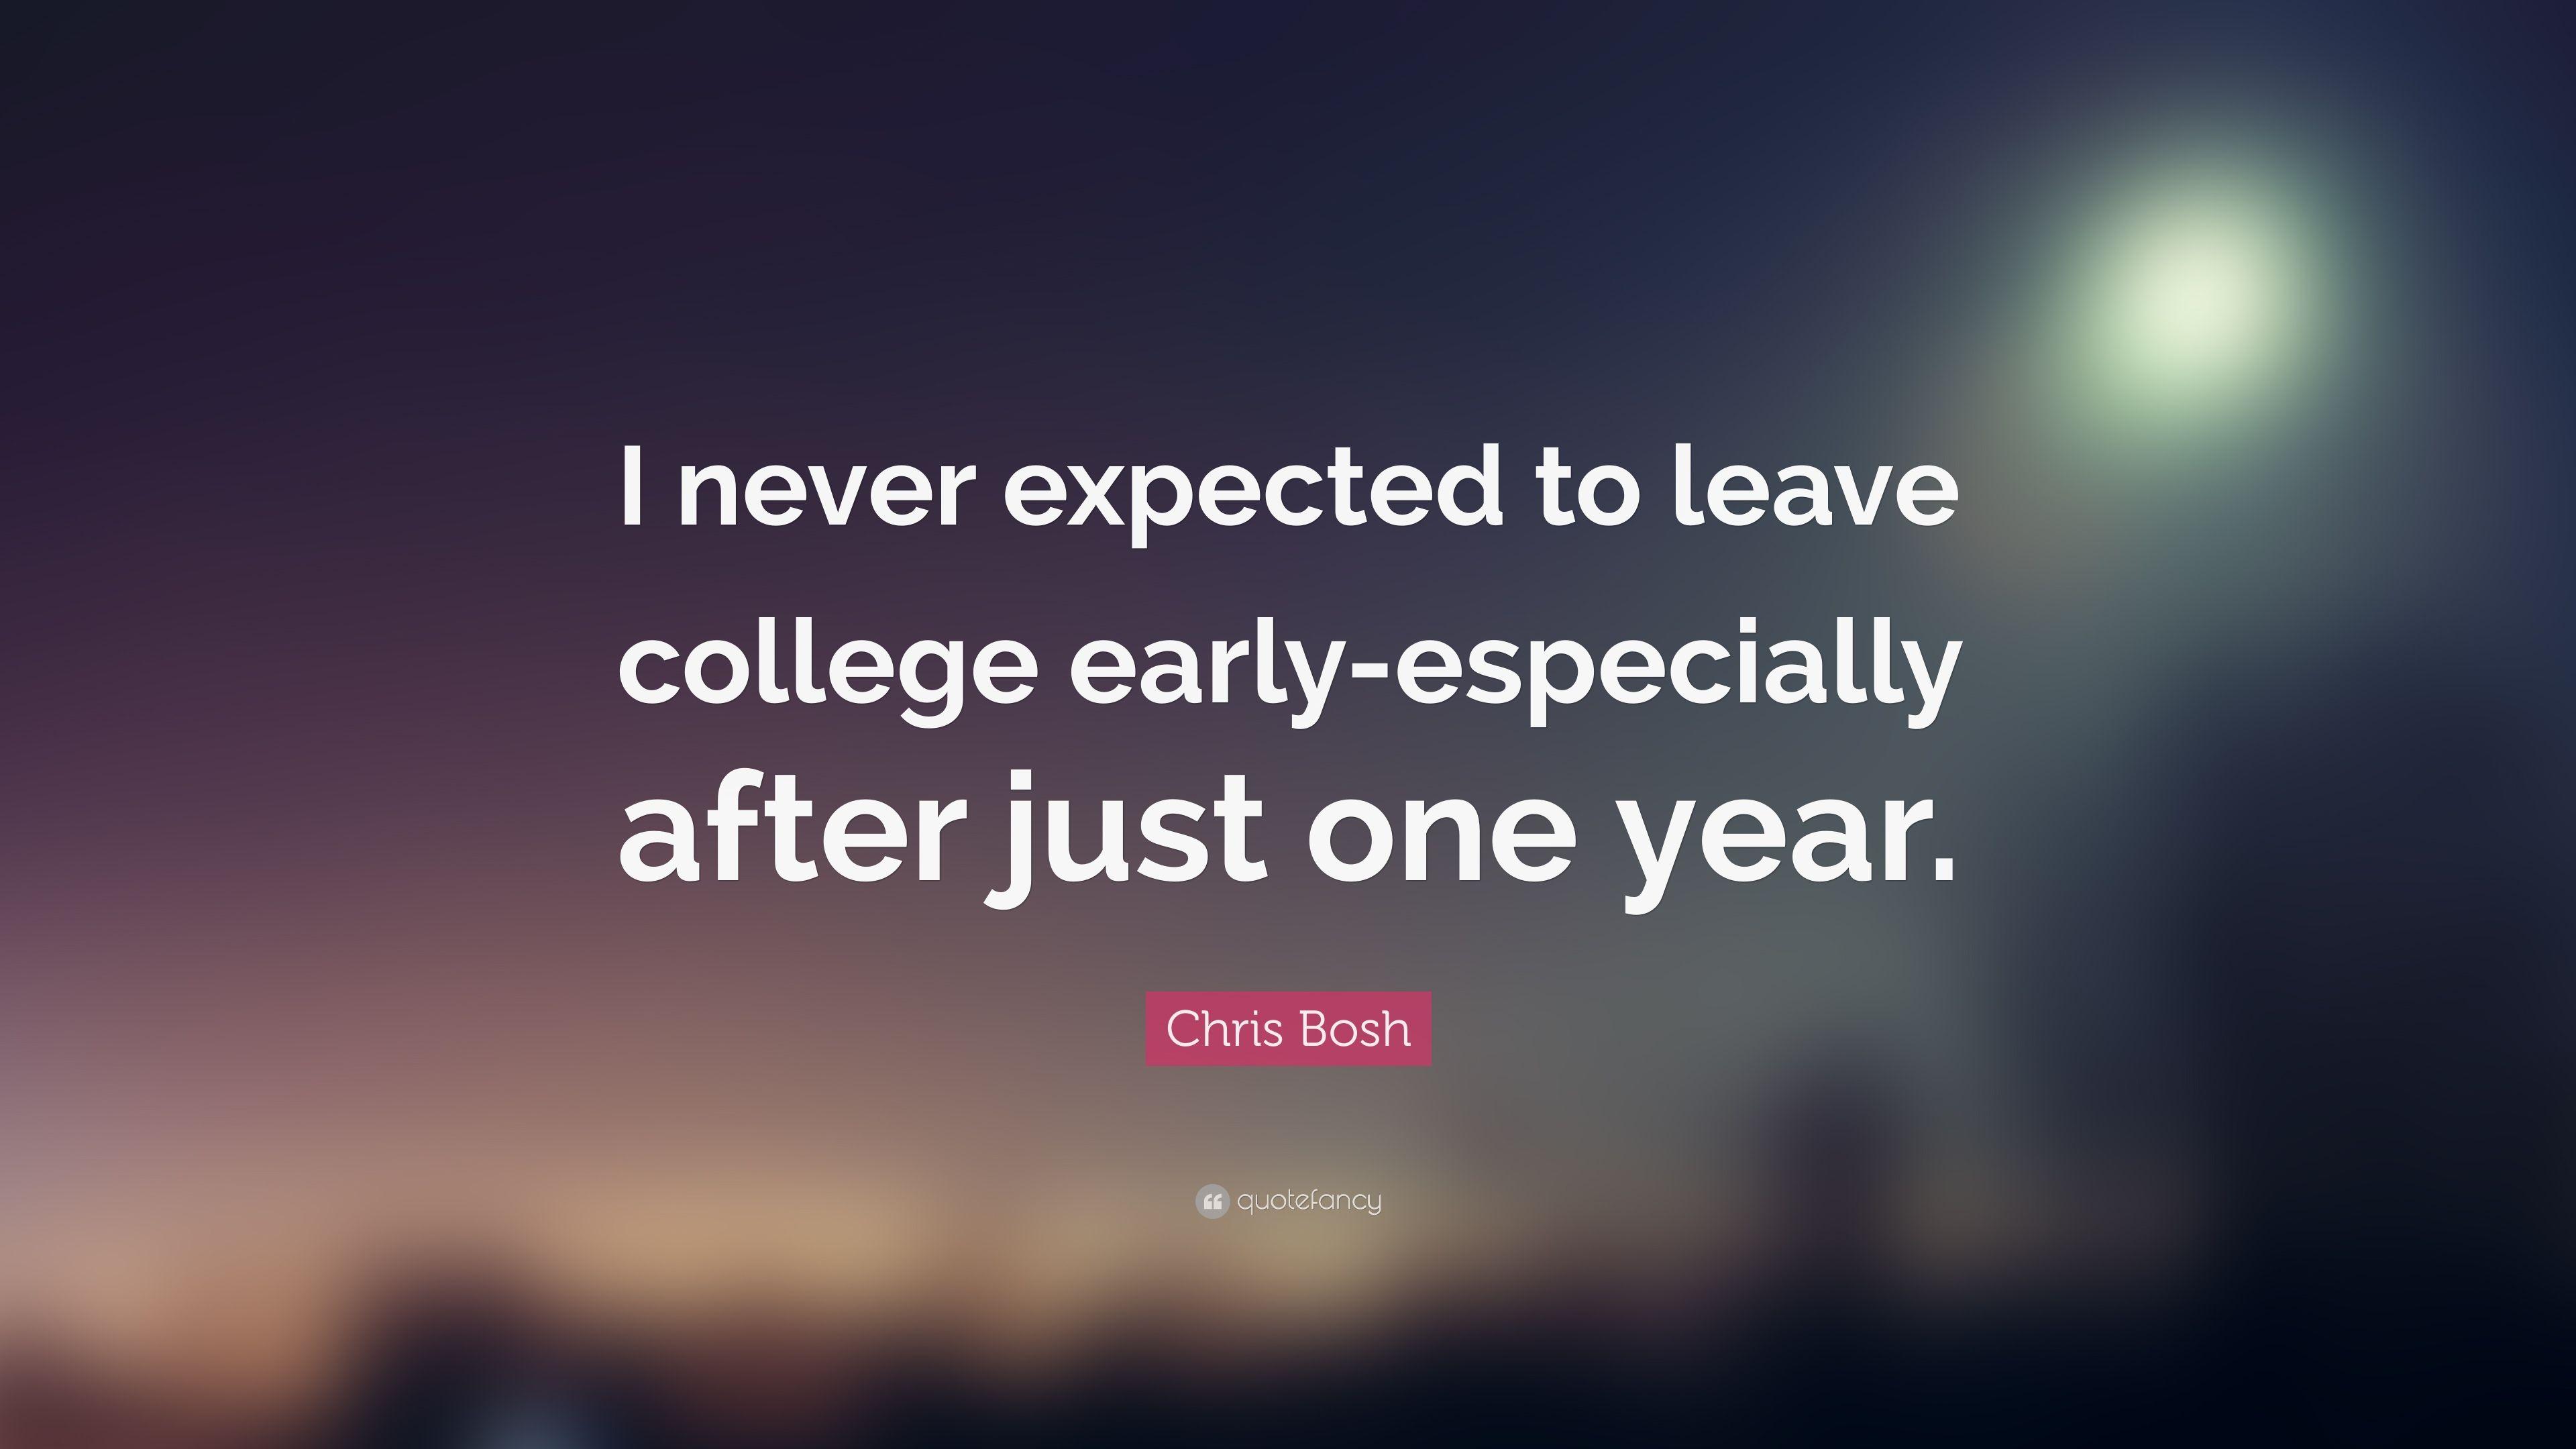 Chris Bosh Quote: “I never expected to leave college early